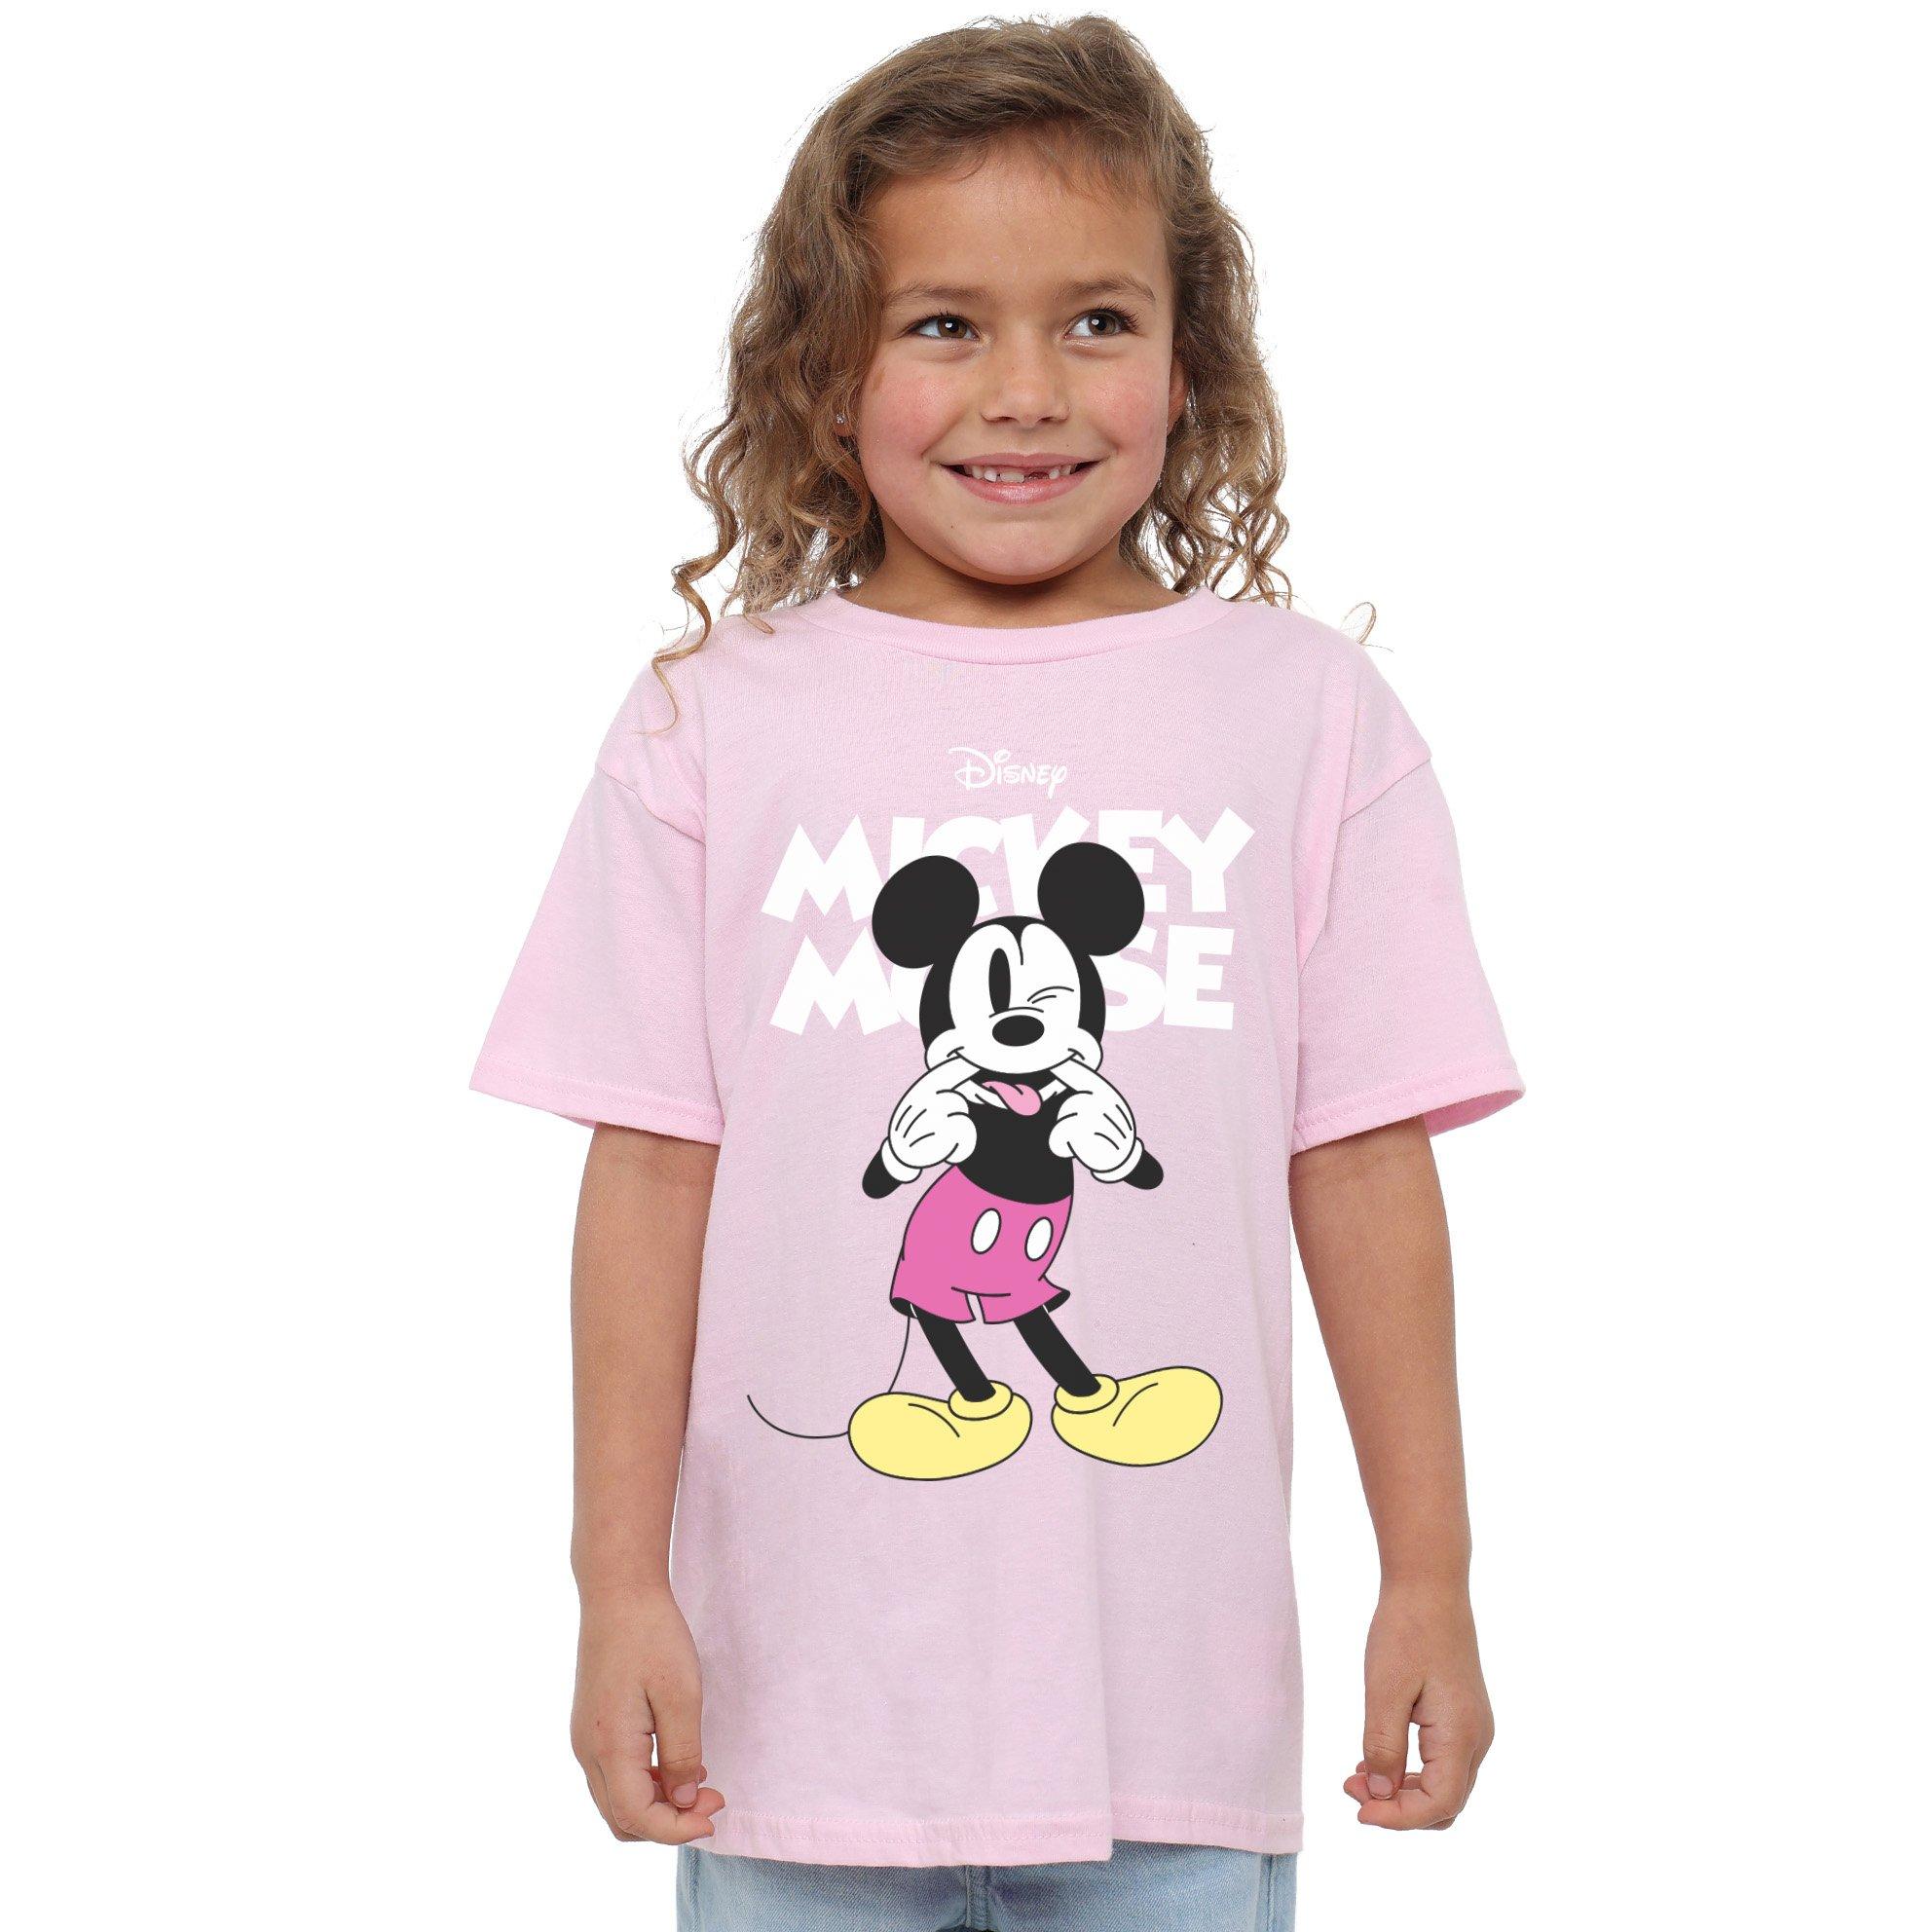 Mickey Mouse Silly Face Girls T-Shirt